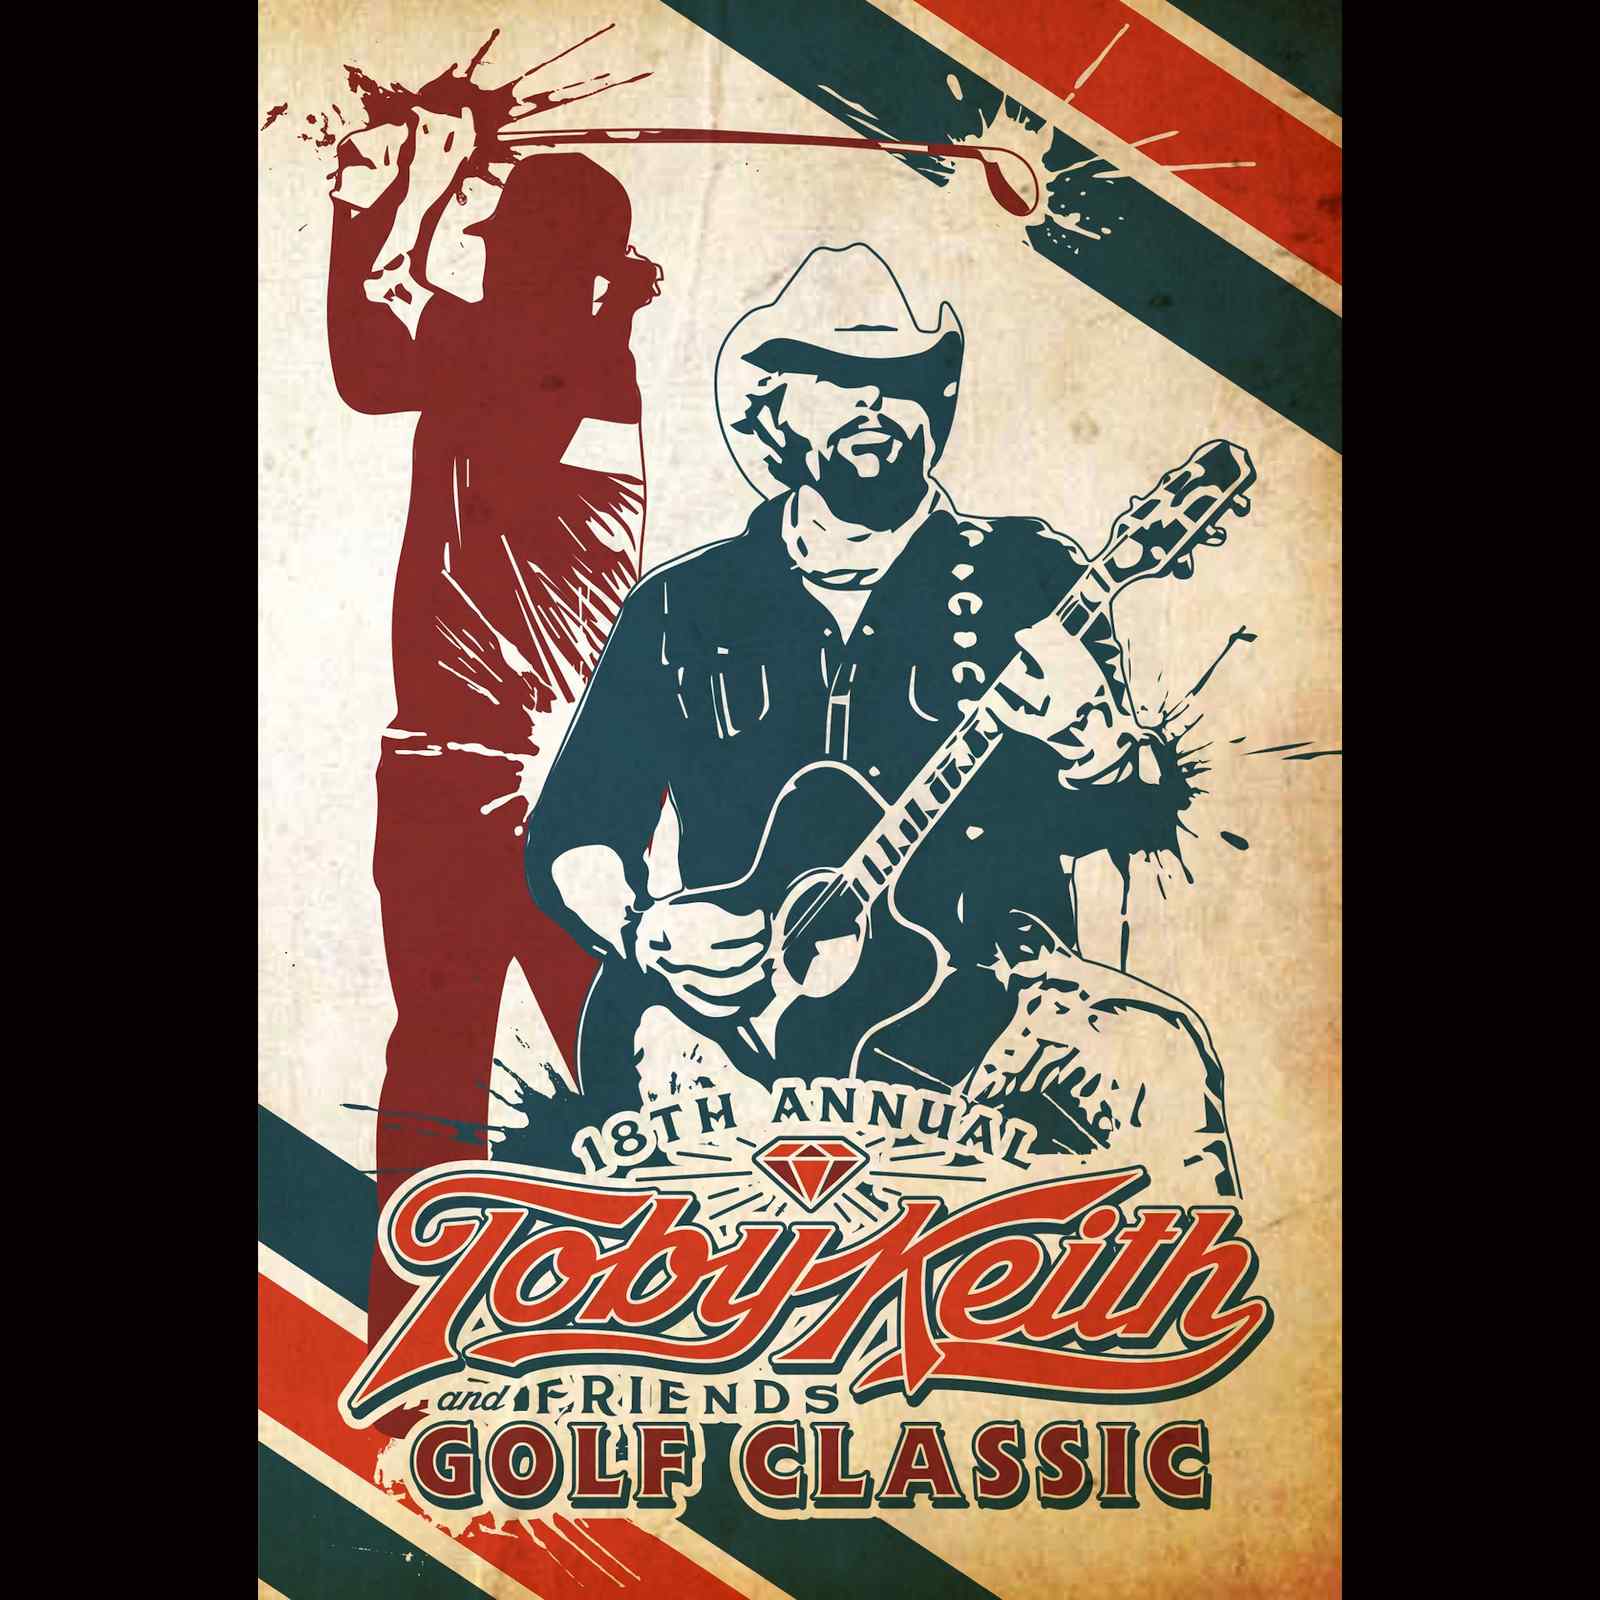 Toby Keith & Friends Golf Classic Turns 18 May 20-21